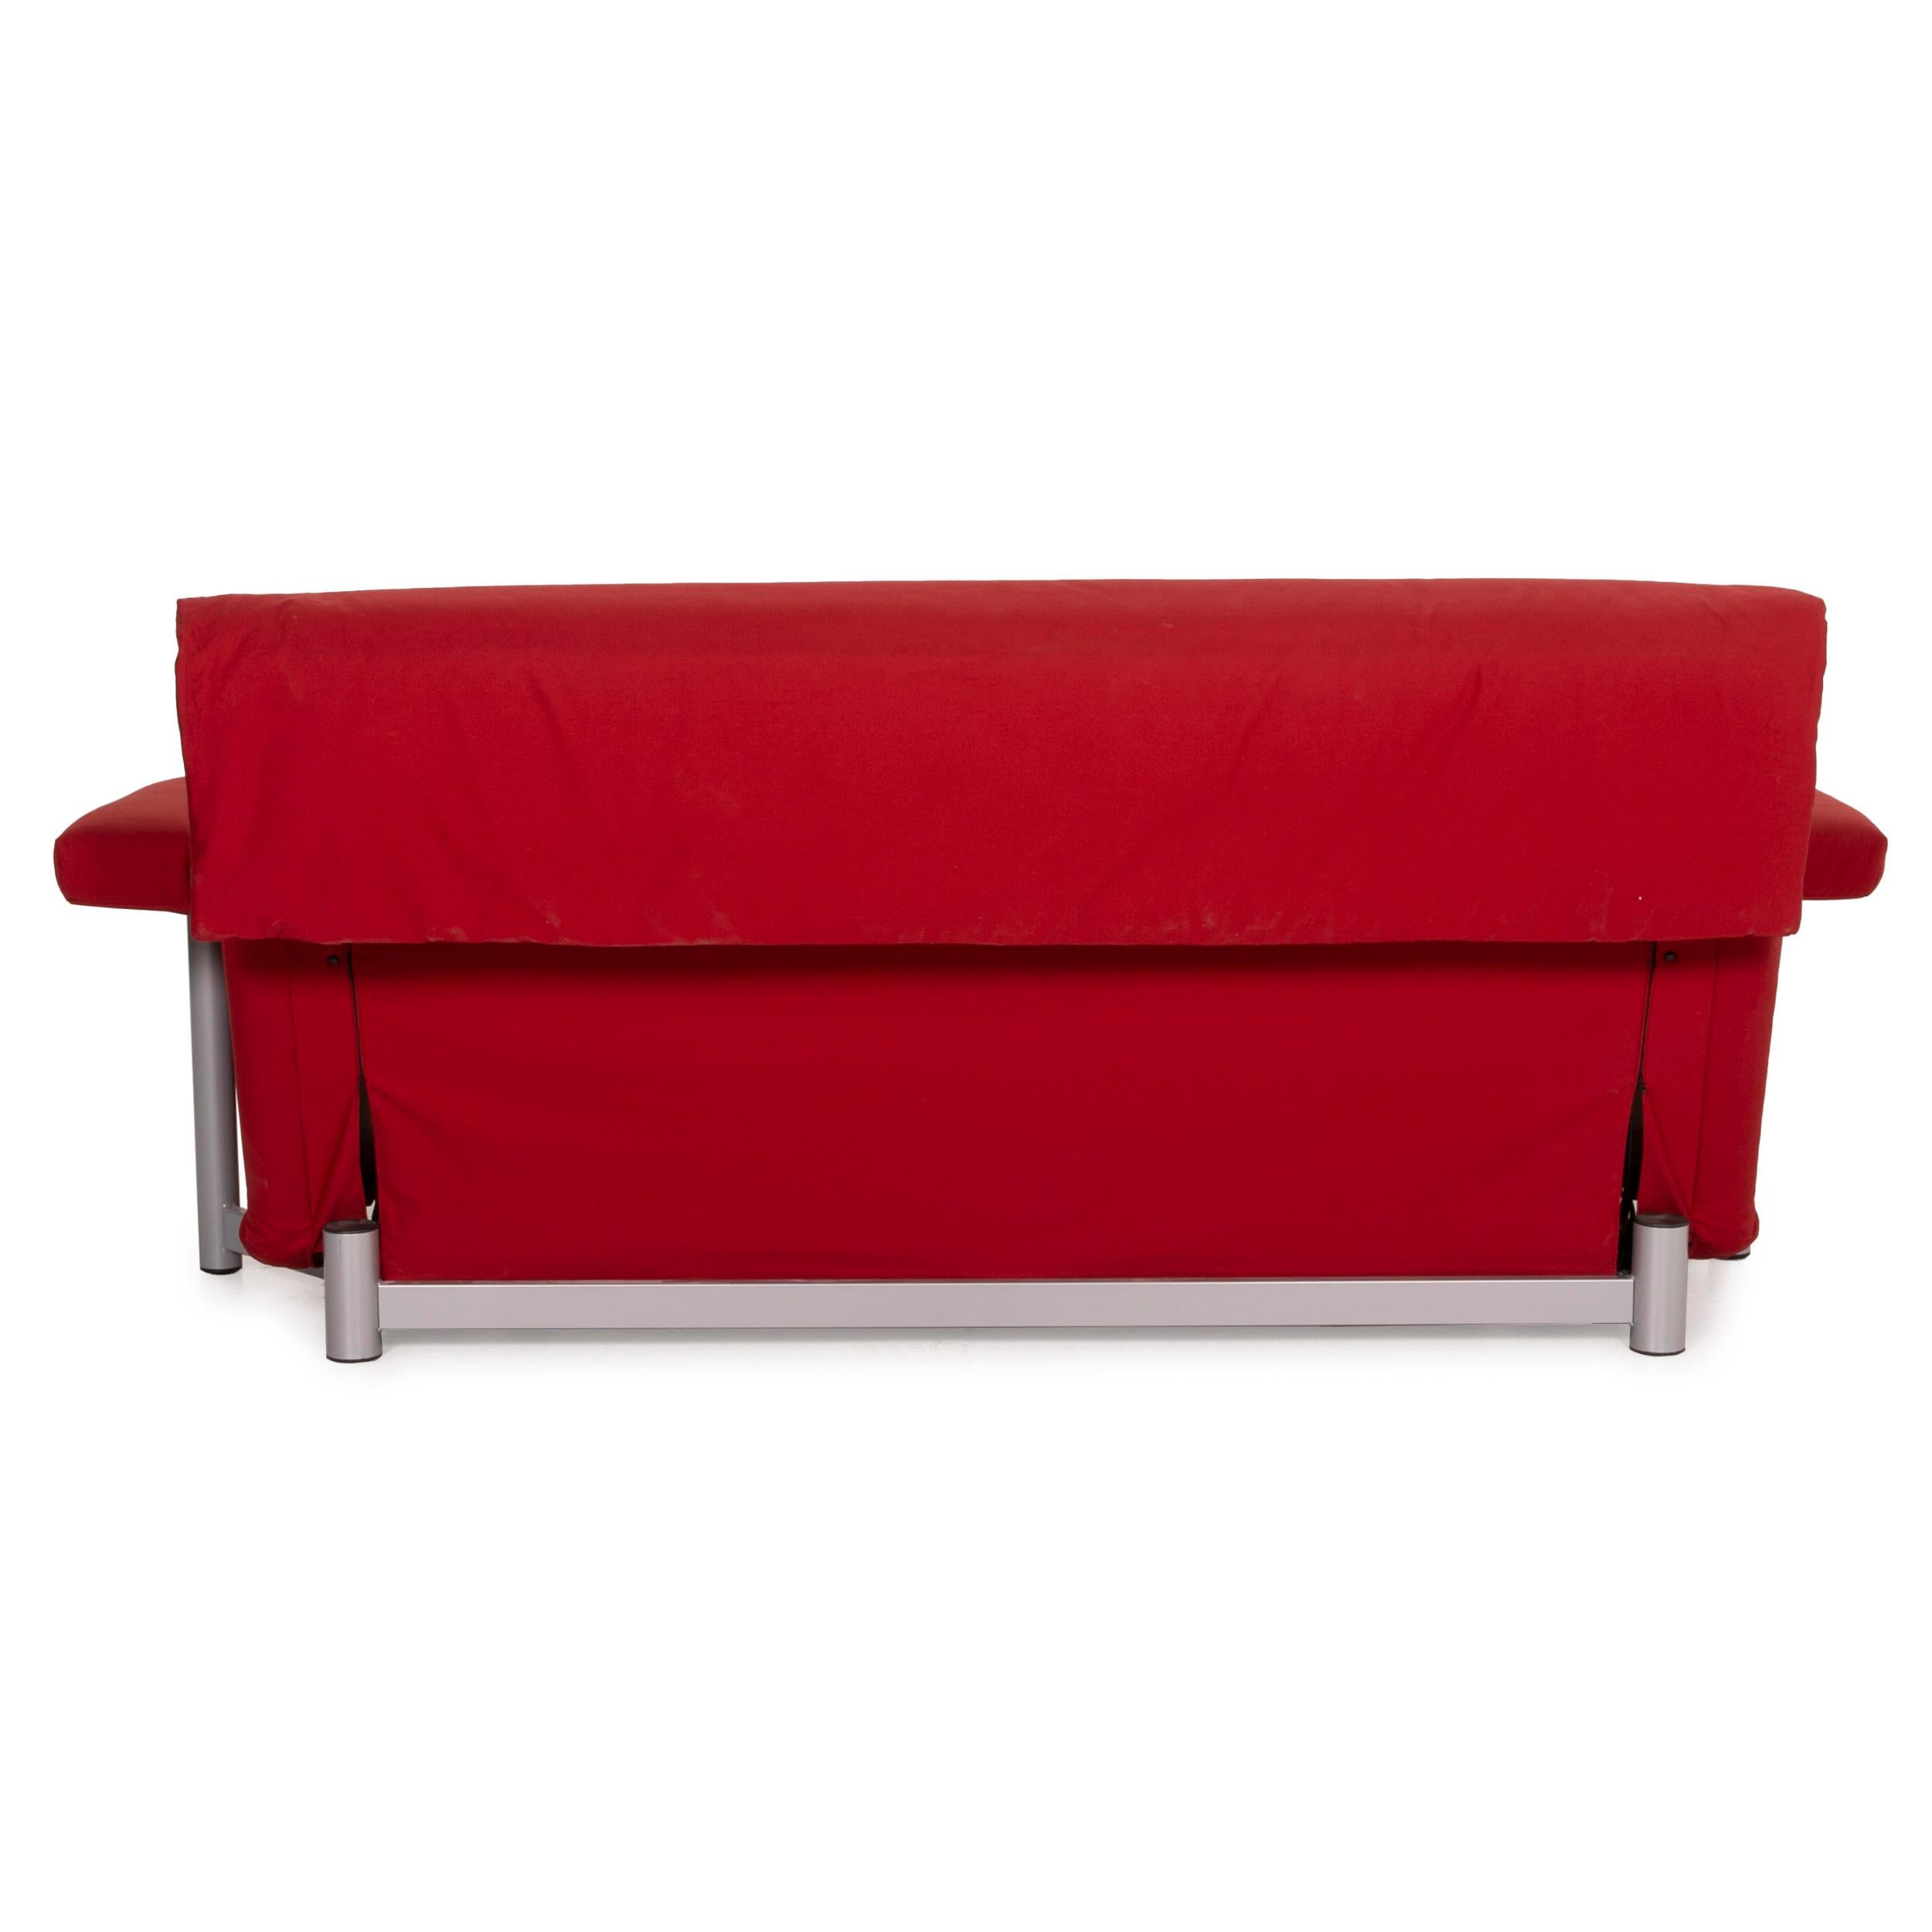 Ligne Roset Multy Fabric Sofa Red Two-Seater Sleeping Function Sofa Bed 1